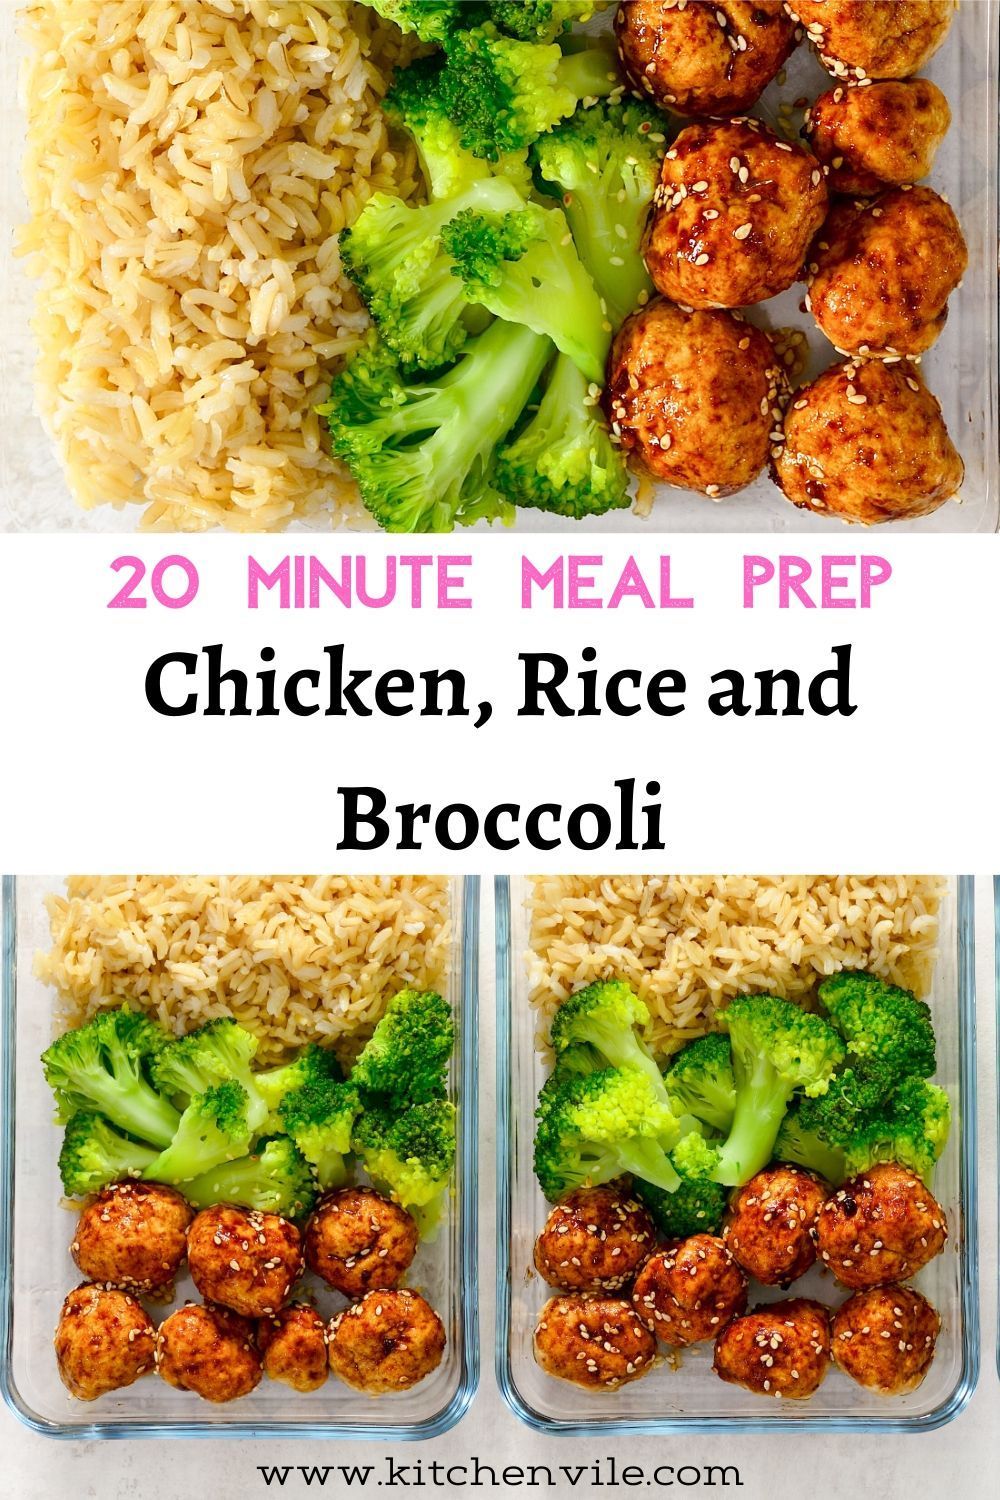 20-minute meal-prep chicken, rice, and broccoli -   19 healthy recipes Meal Prep families ideas